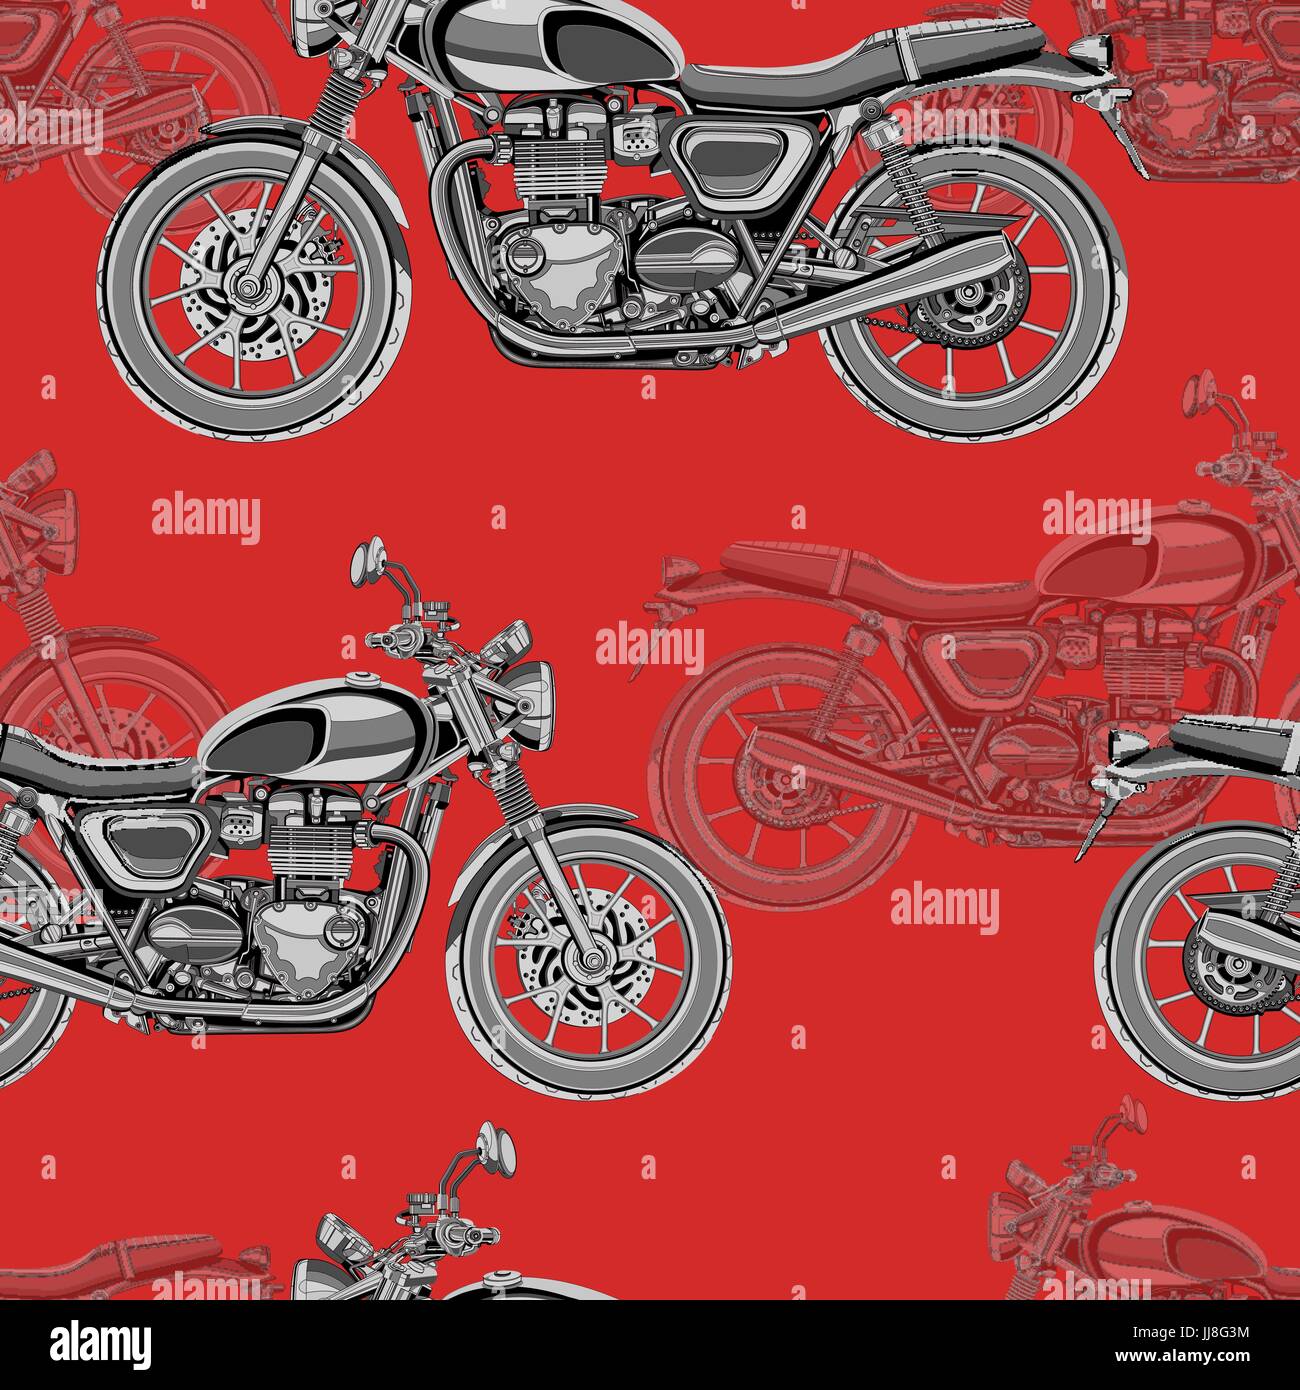 Motorcycle seamless pattern, vector background. Monochrome illustration. Black and white motorcycles with many details on a red background. For wallpaper design, fabric, wrappers Stock Vector